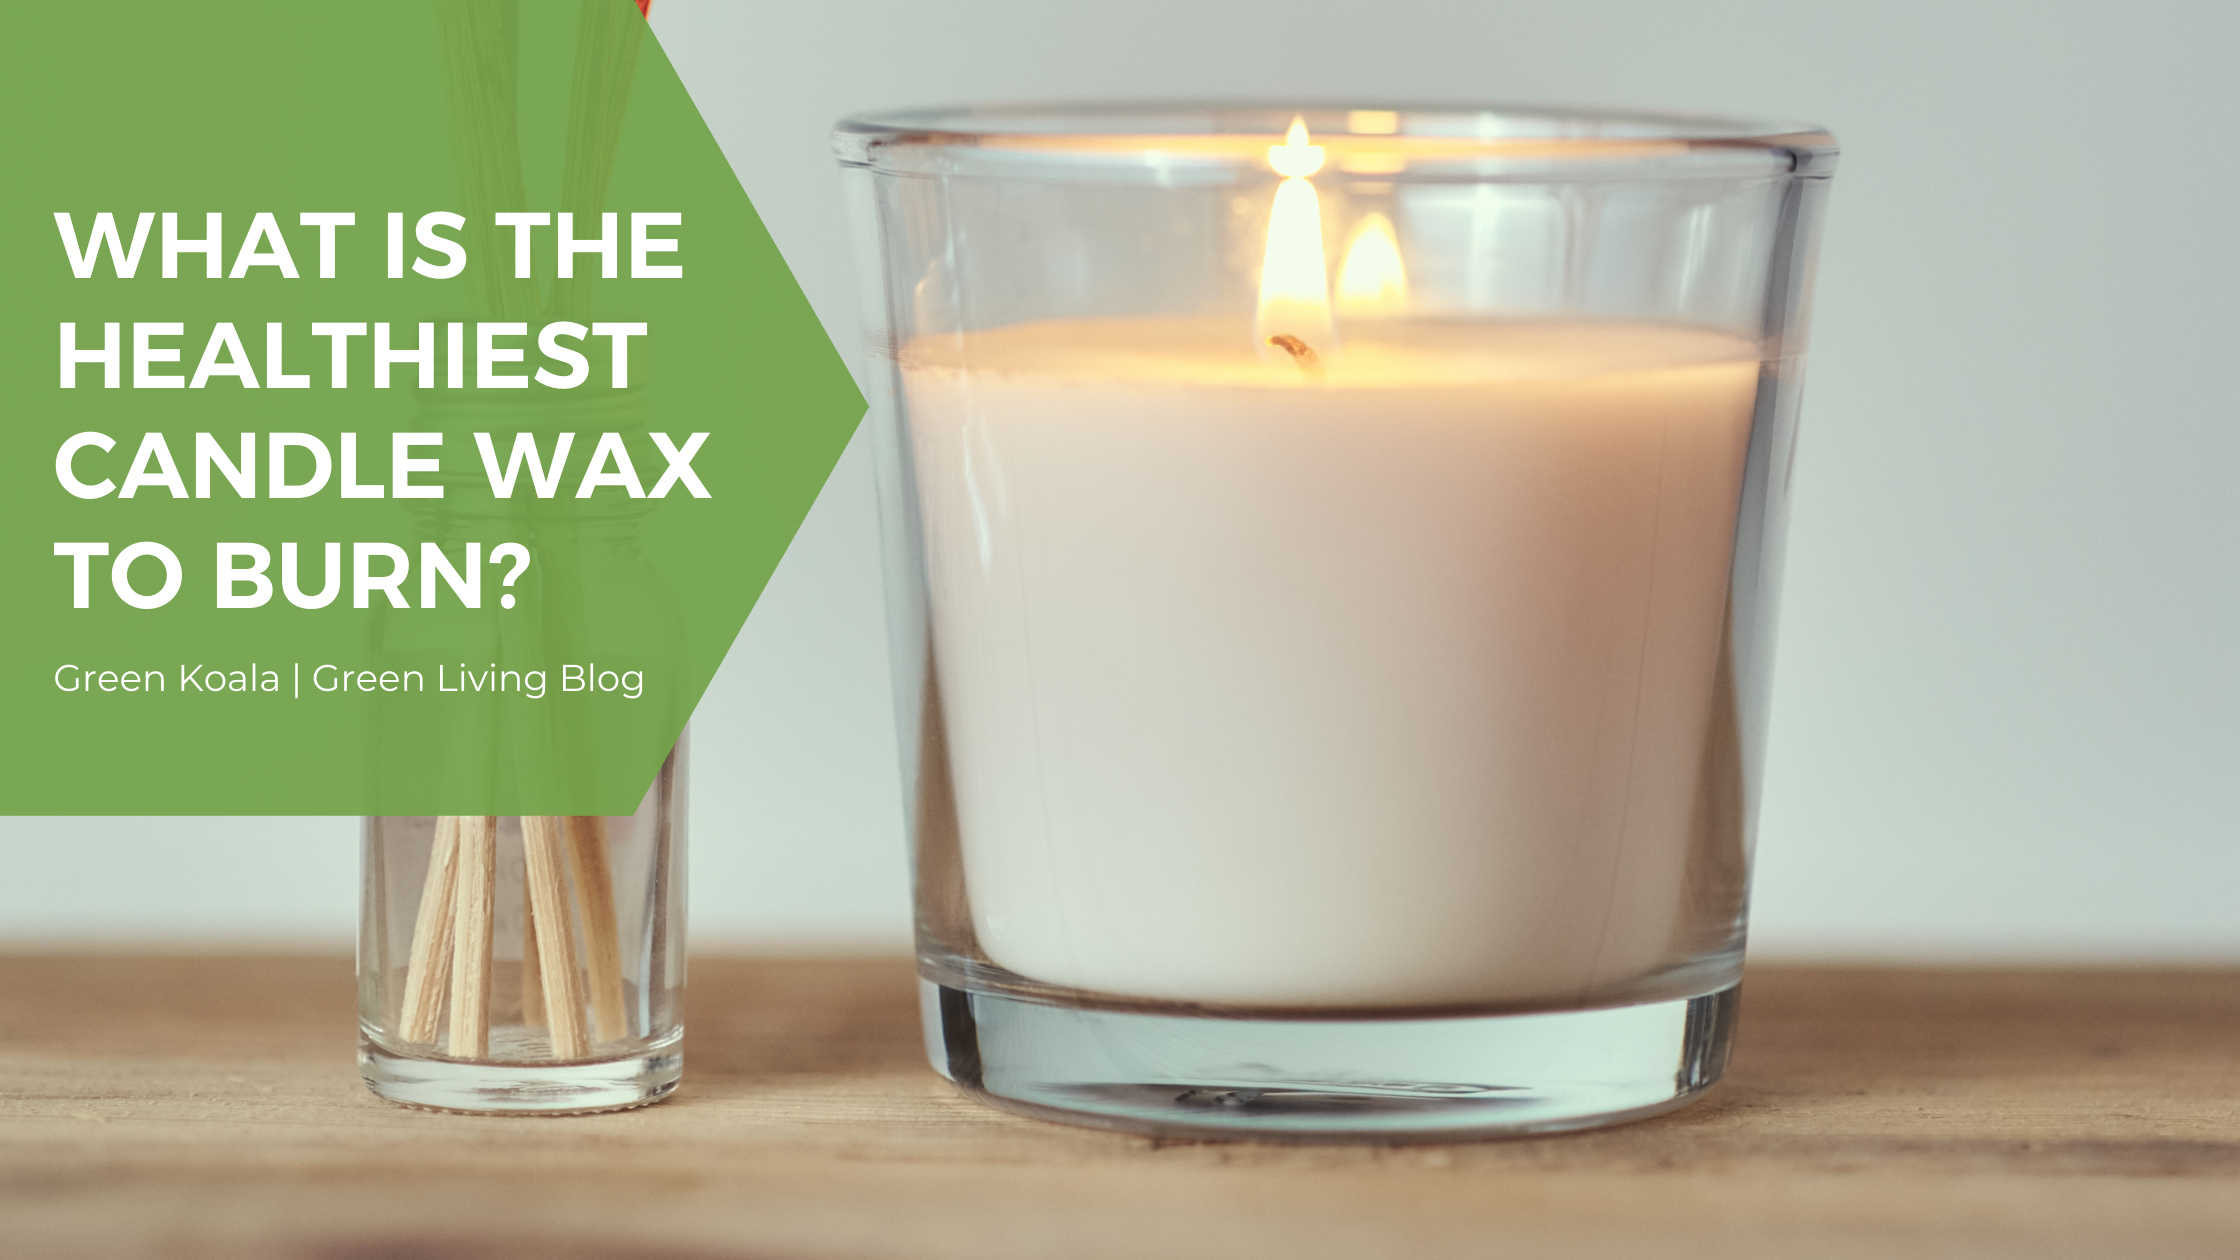 What is the healthiest candle wax to burn?